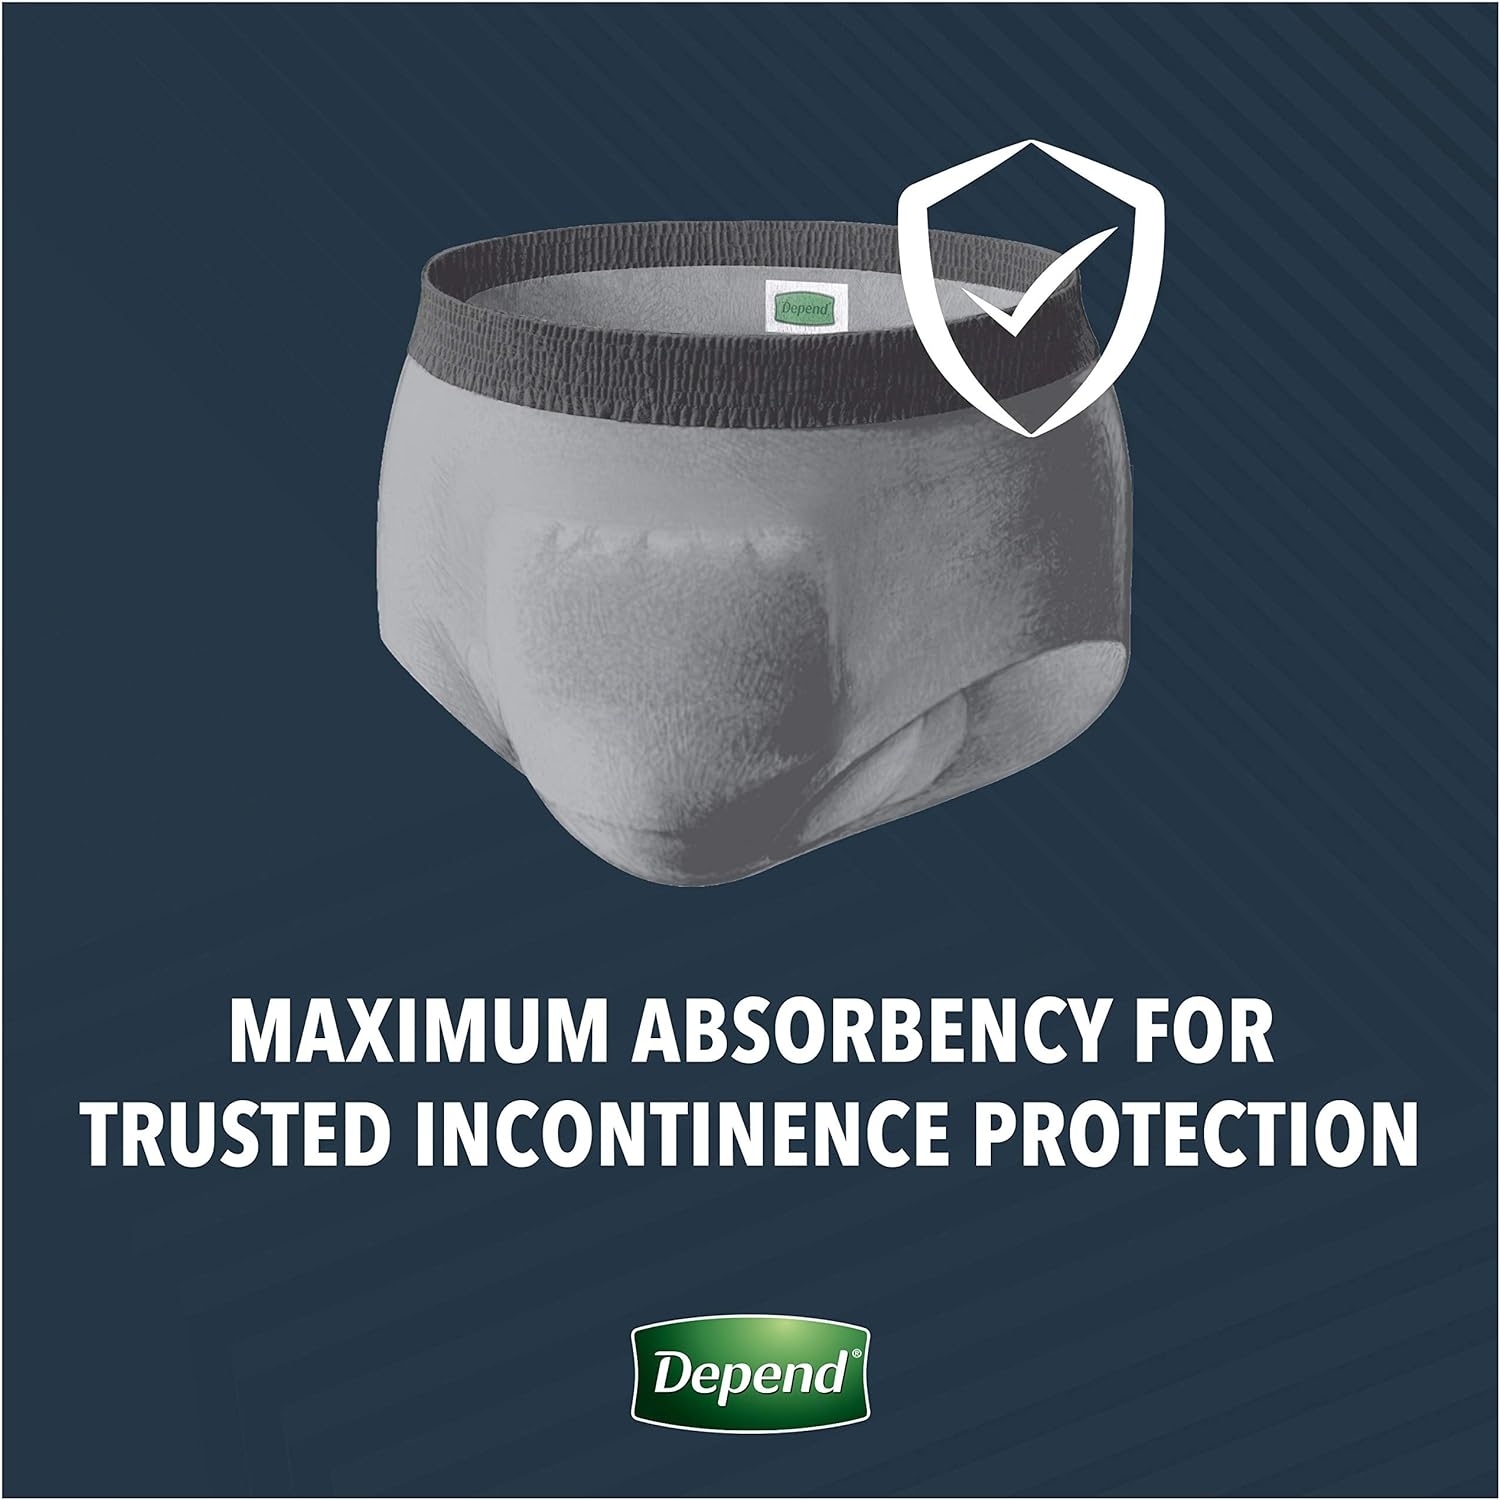 Depend Real Fit Incontinence Underwear for Men, Maximum Absorbency, Disposable, Large/Extra-Large, Black, 52 Count (Packaging May Vary)